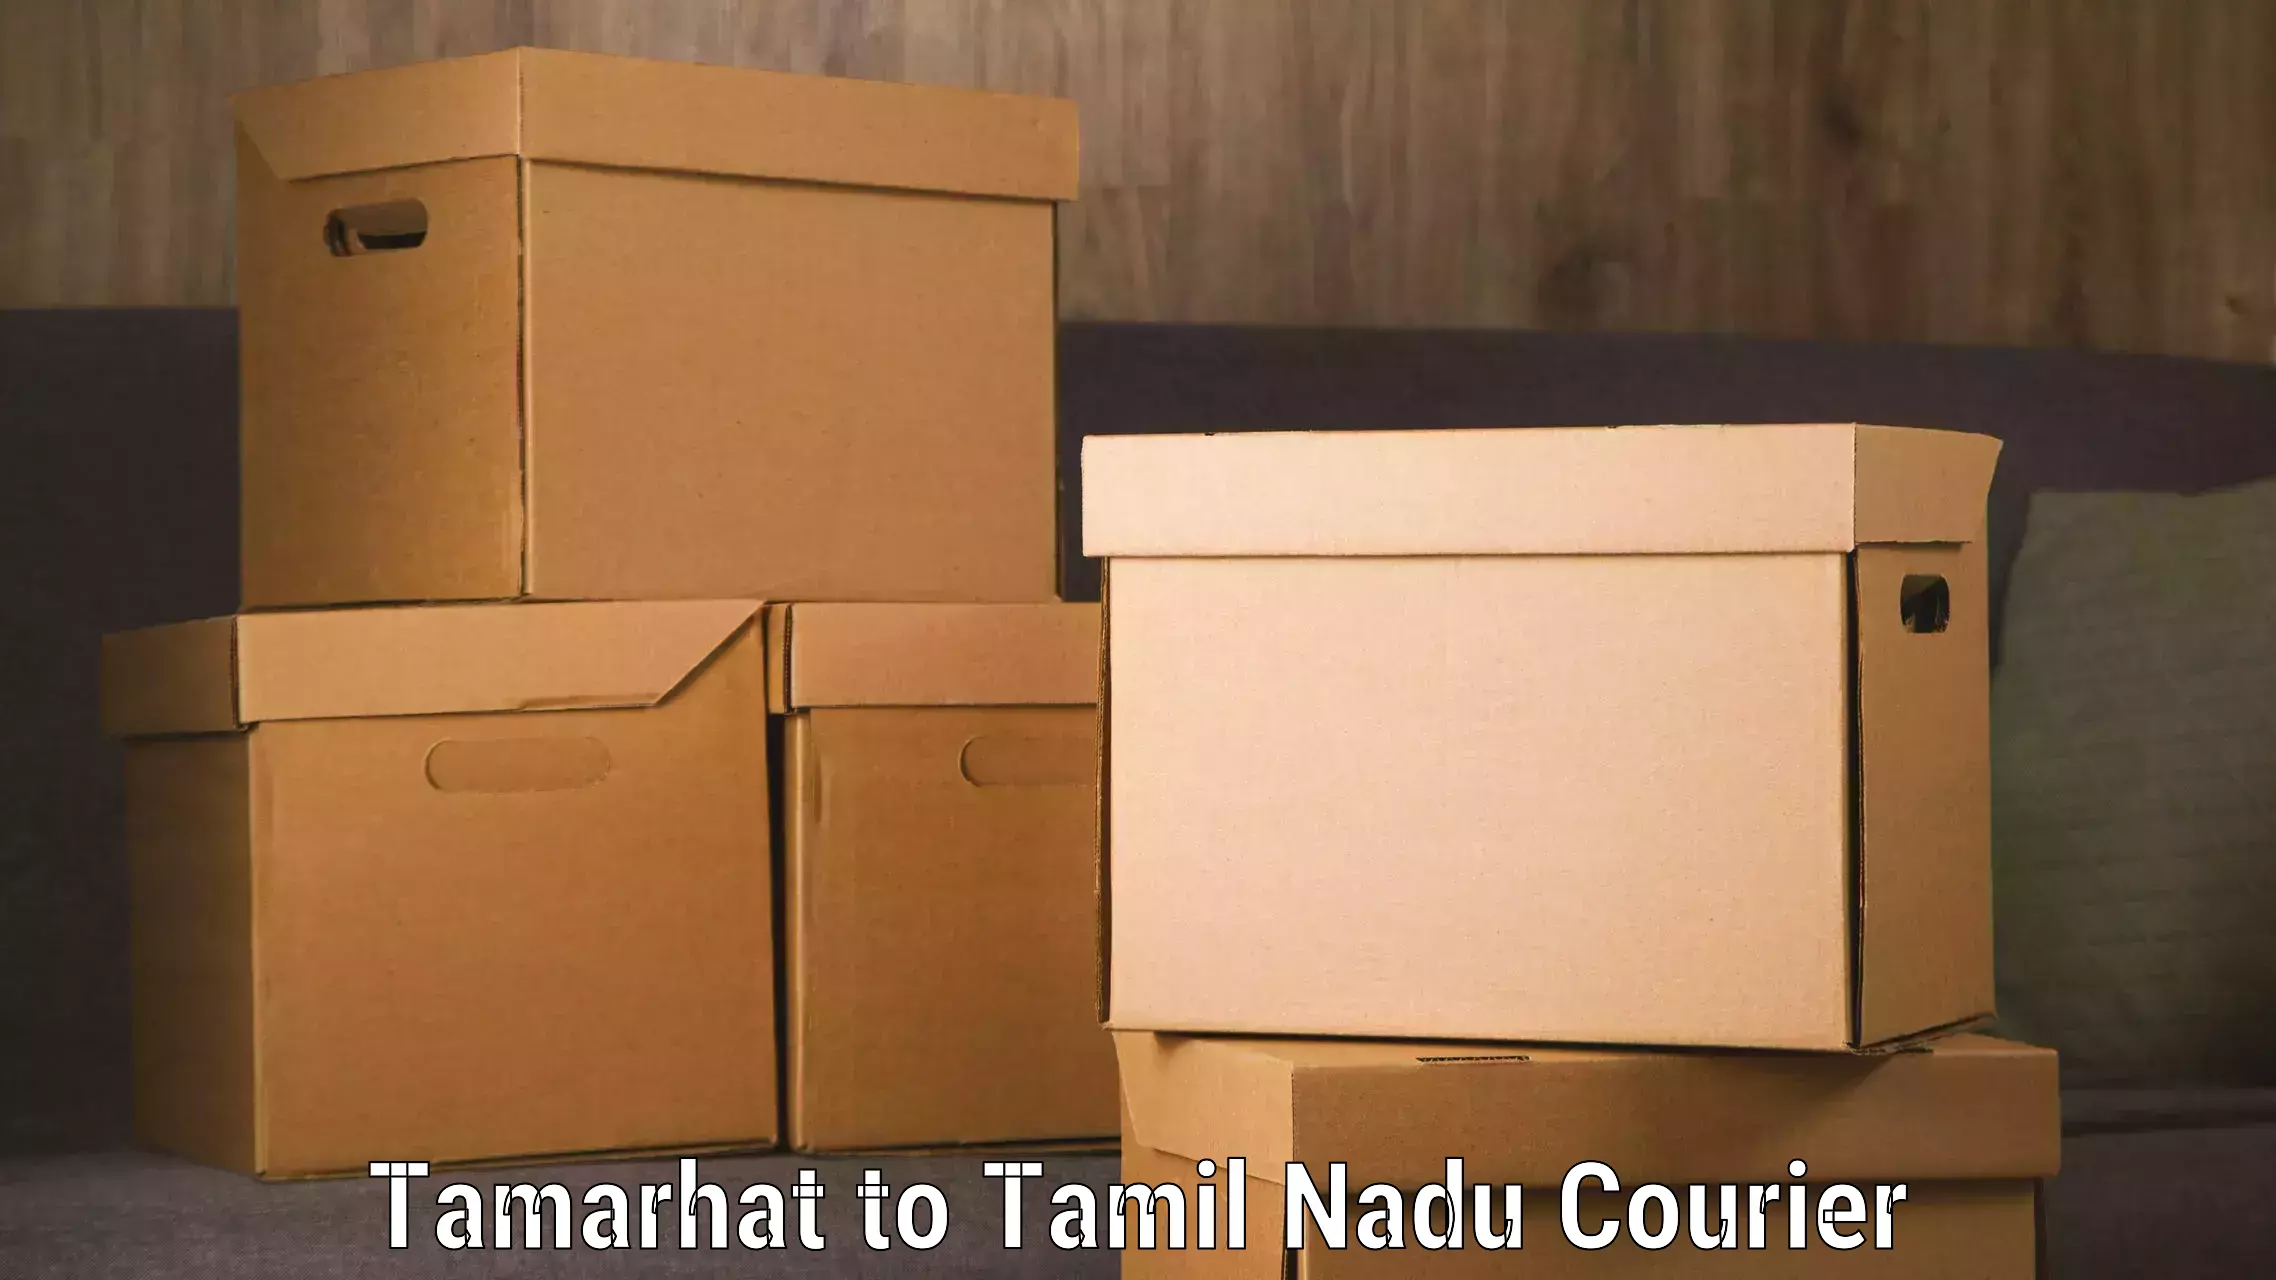 Baggage transport network Tamarhat to Saveetha Institute of Medical and Technical Sciences Chennai